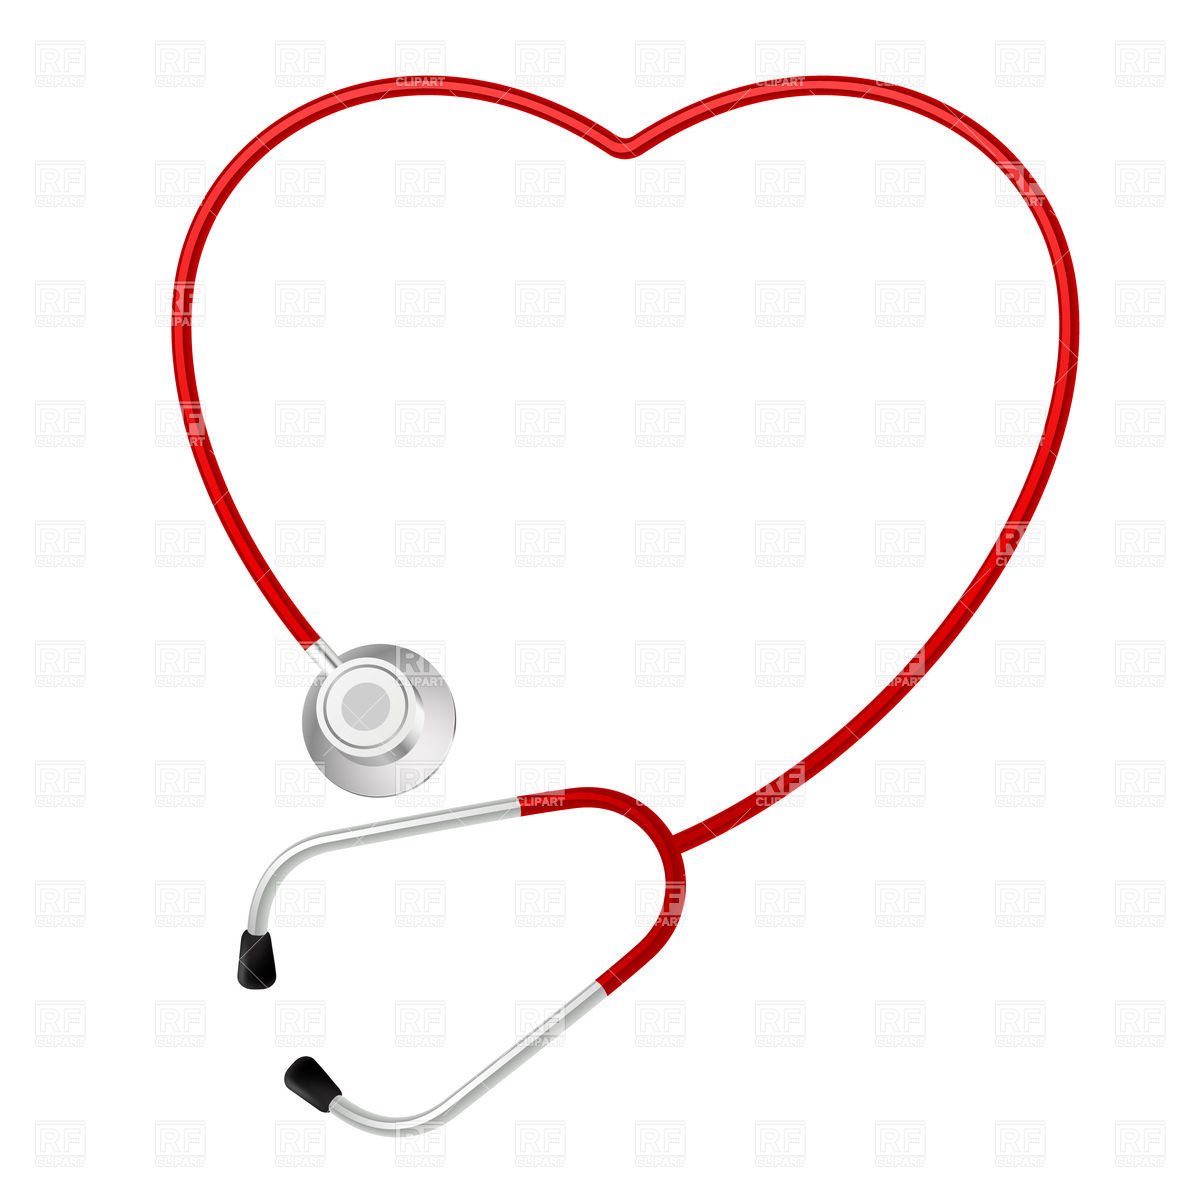 Heart Shaped Stethoscope 8412 Healthcare Medical Download Royalty